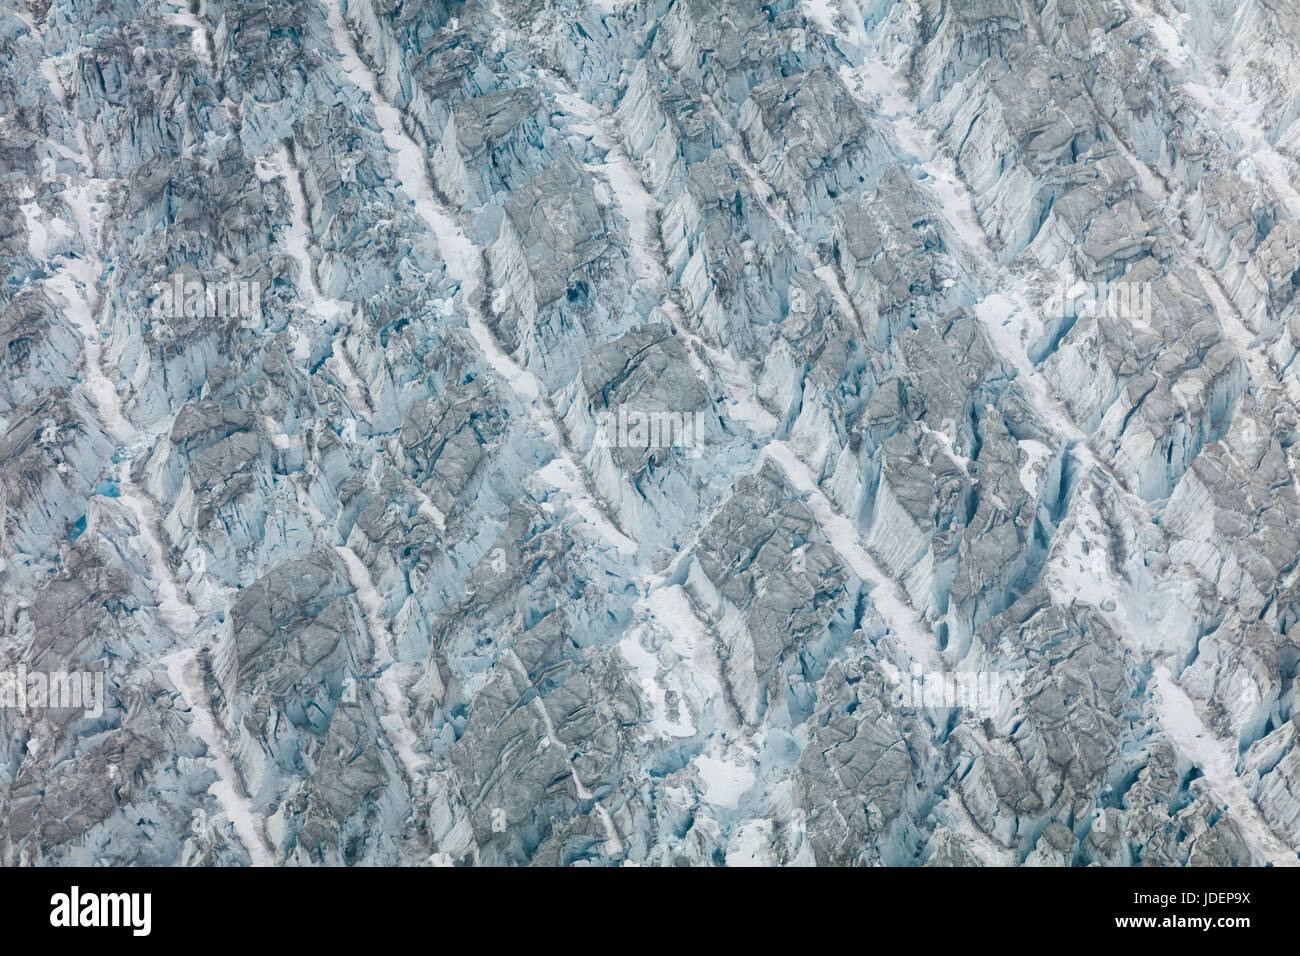 Abstract pattern of white and blue ice in glacier ravines Stock Photo